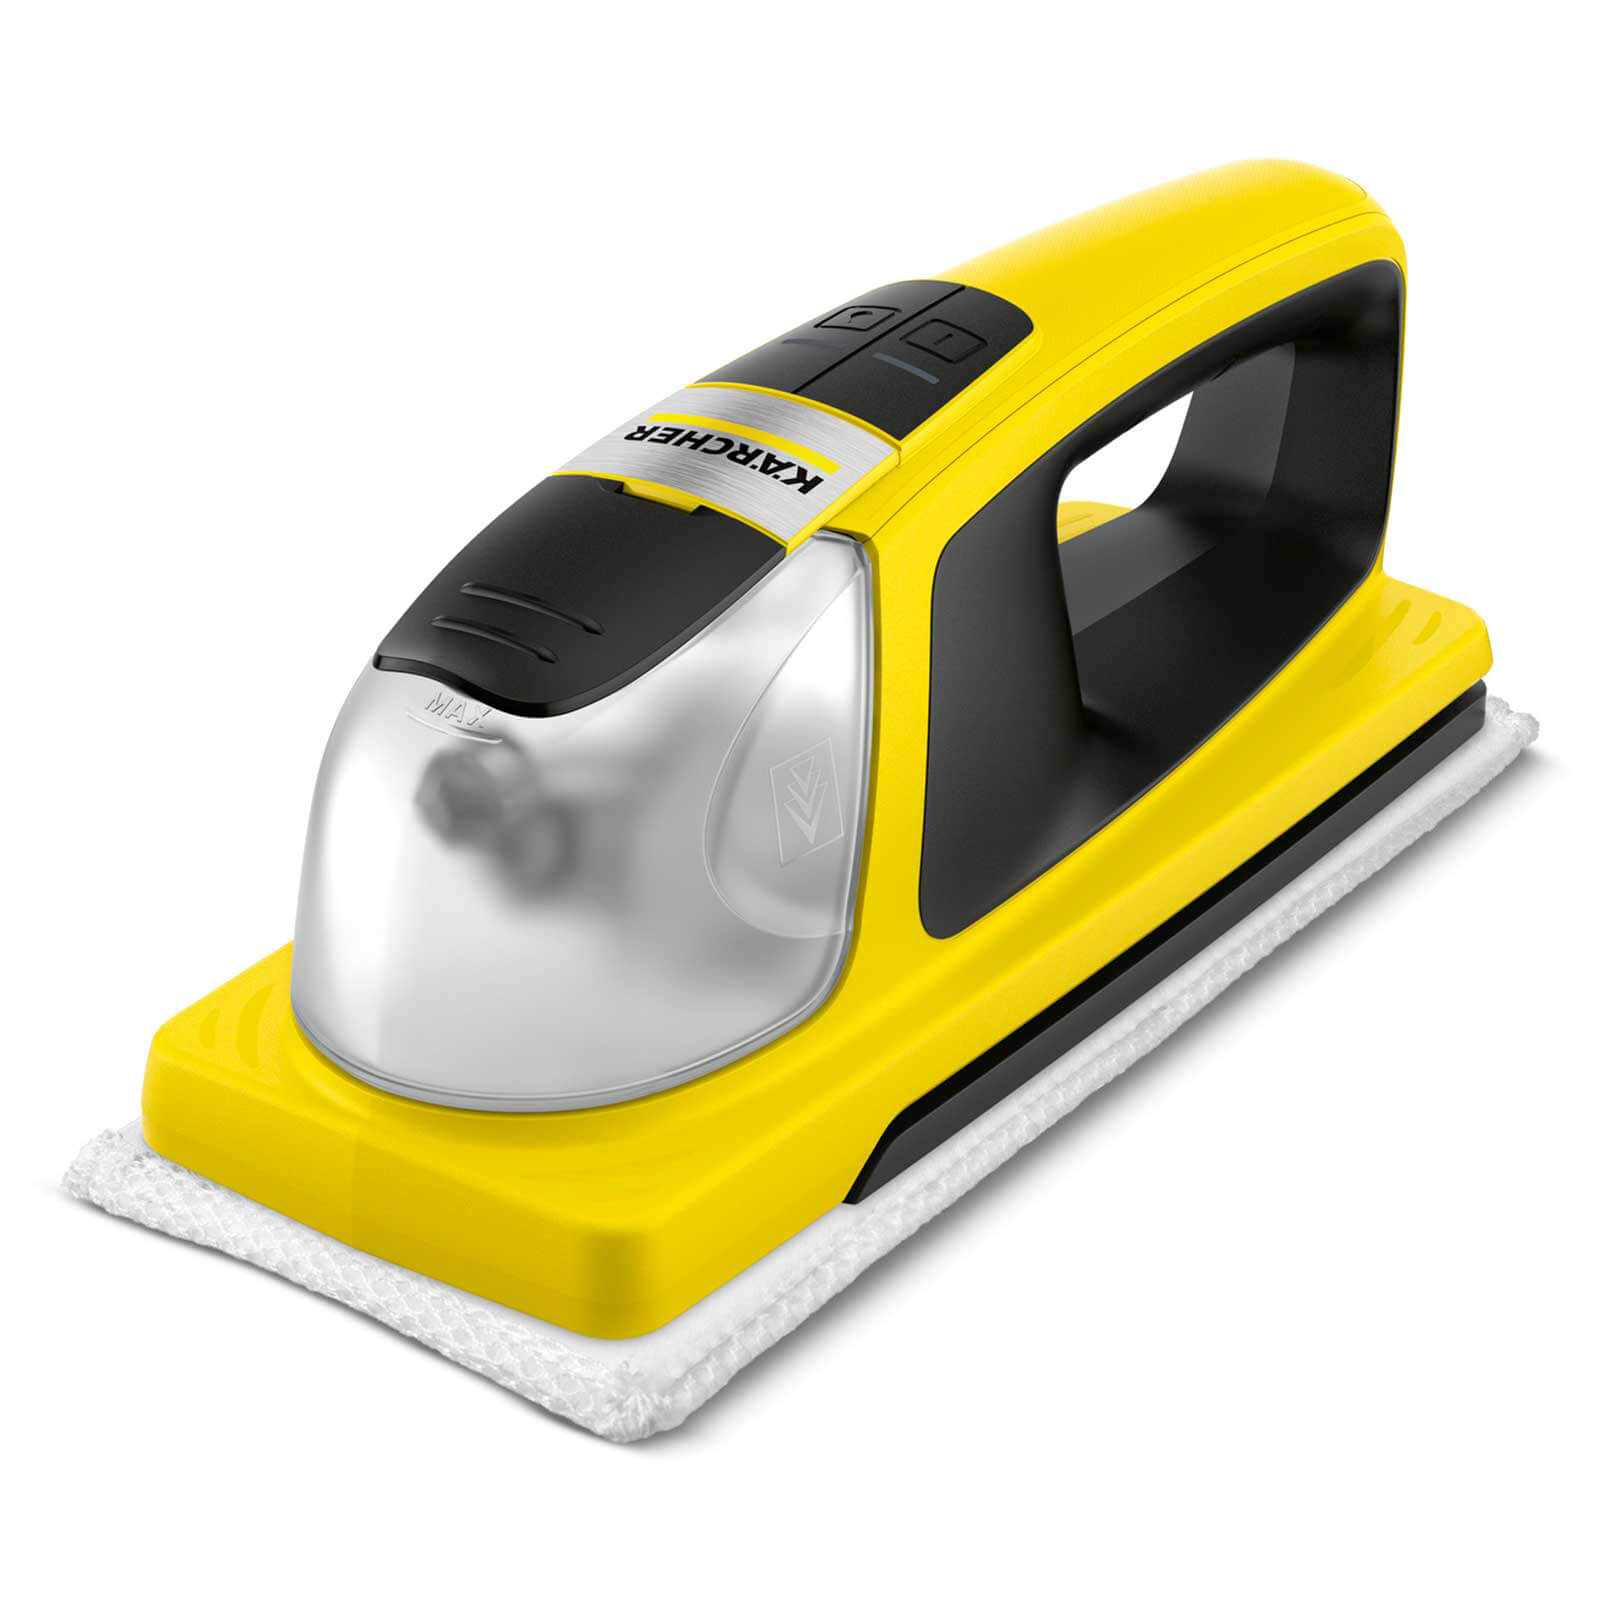 Image of Karcher KV 4 VIBRAPAD Rechargeable Tile and Window Scrubber